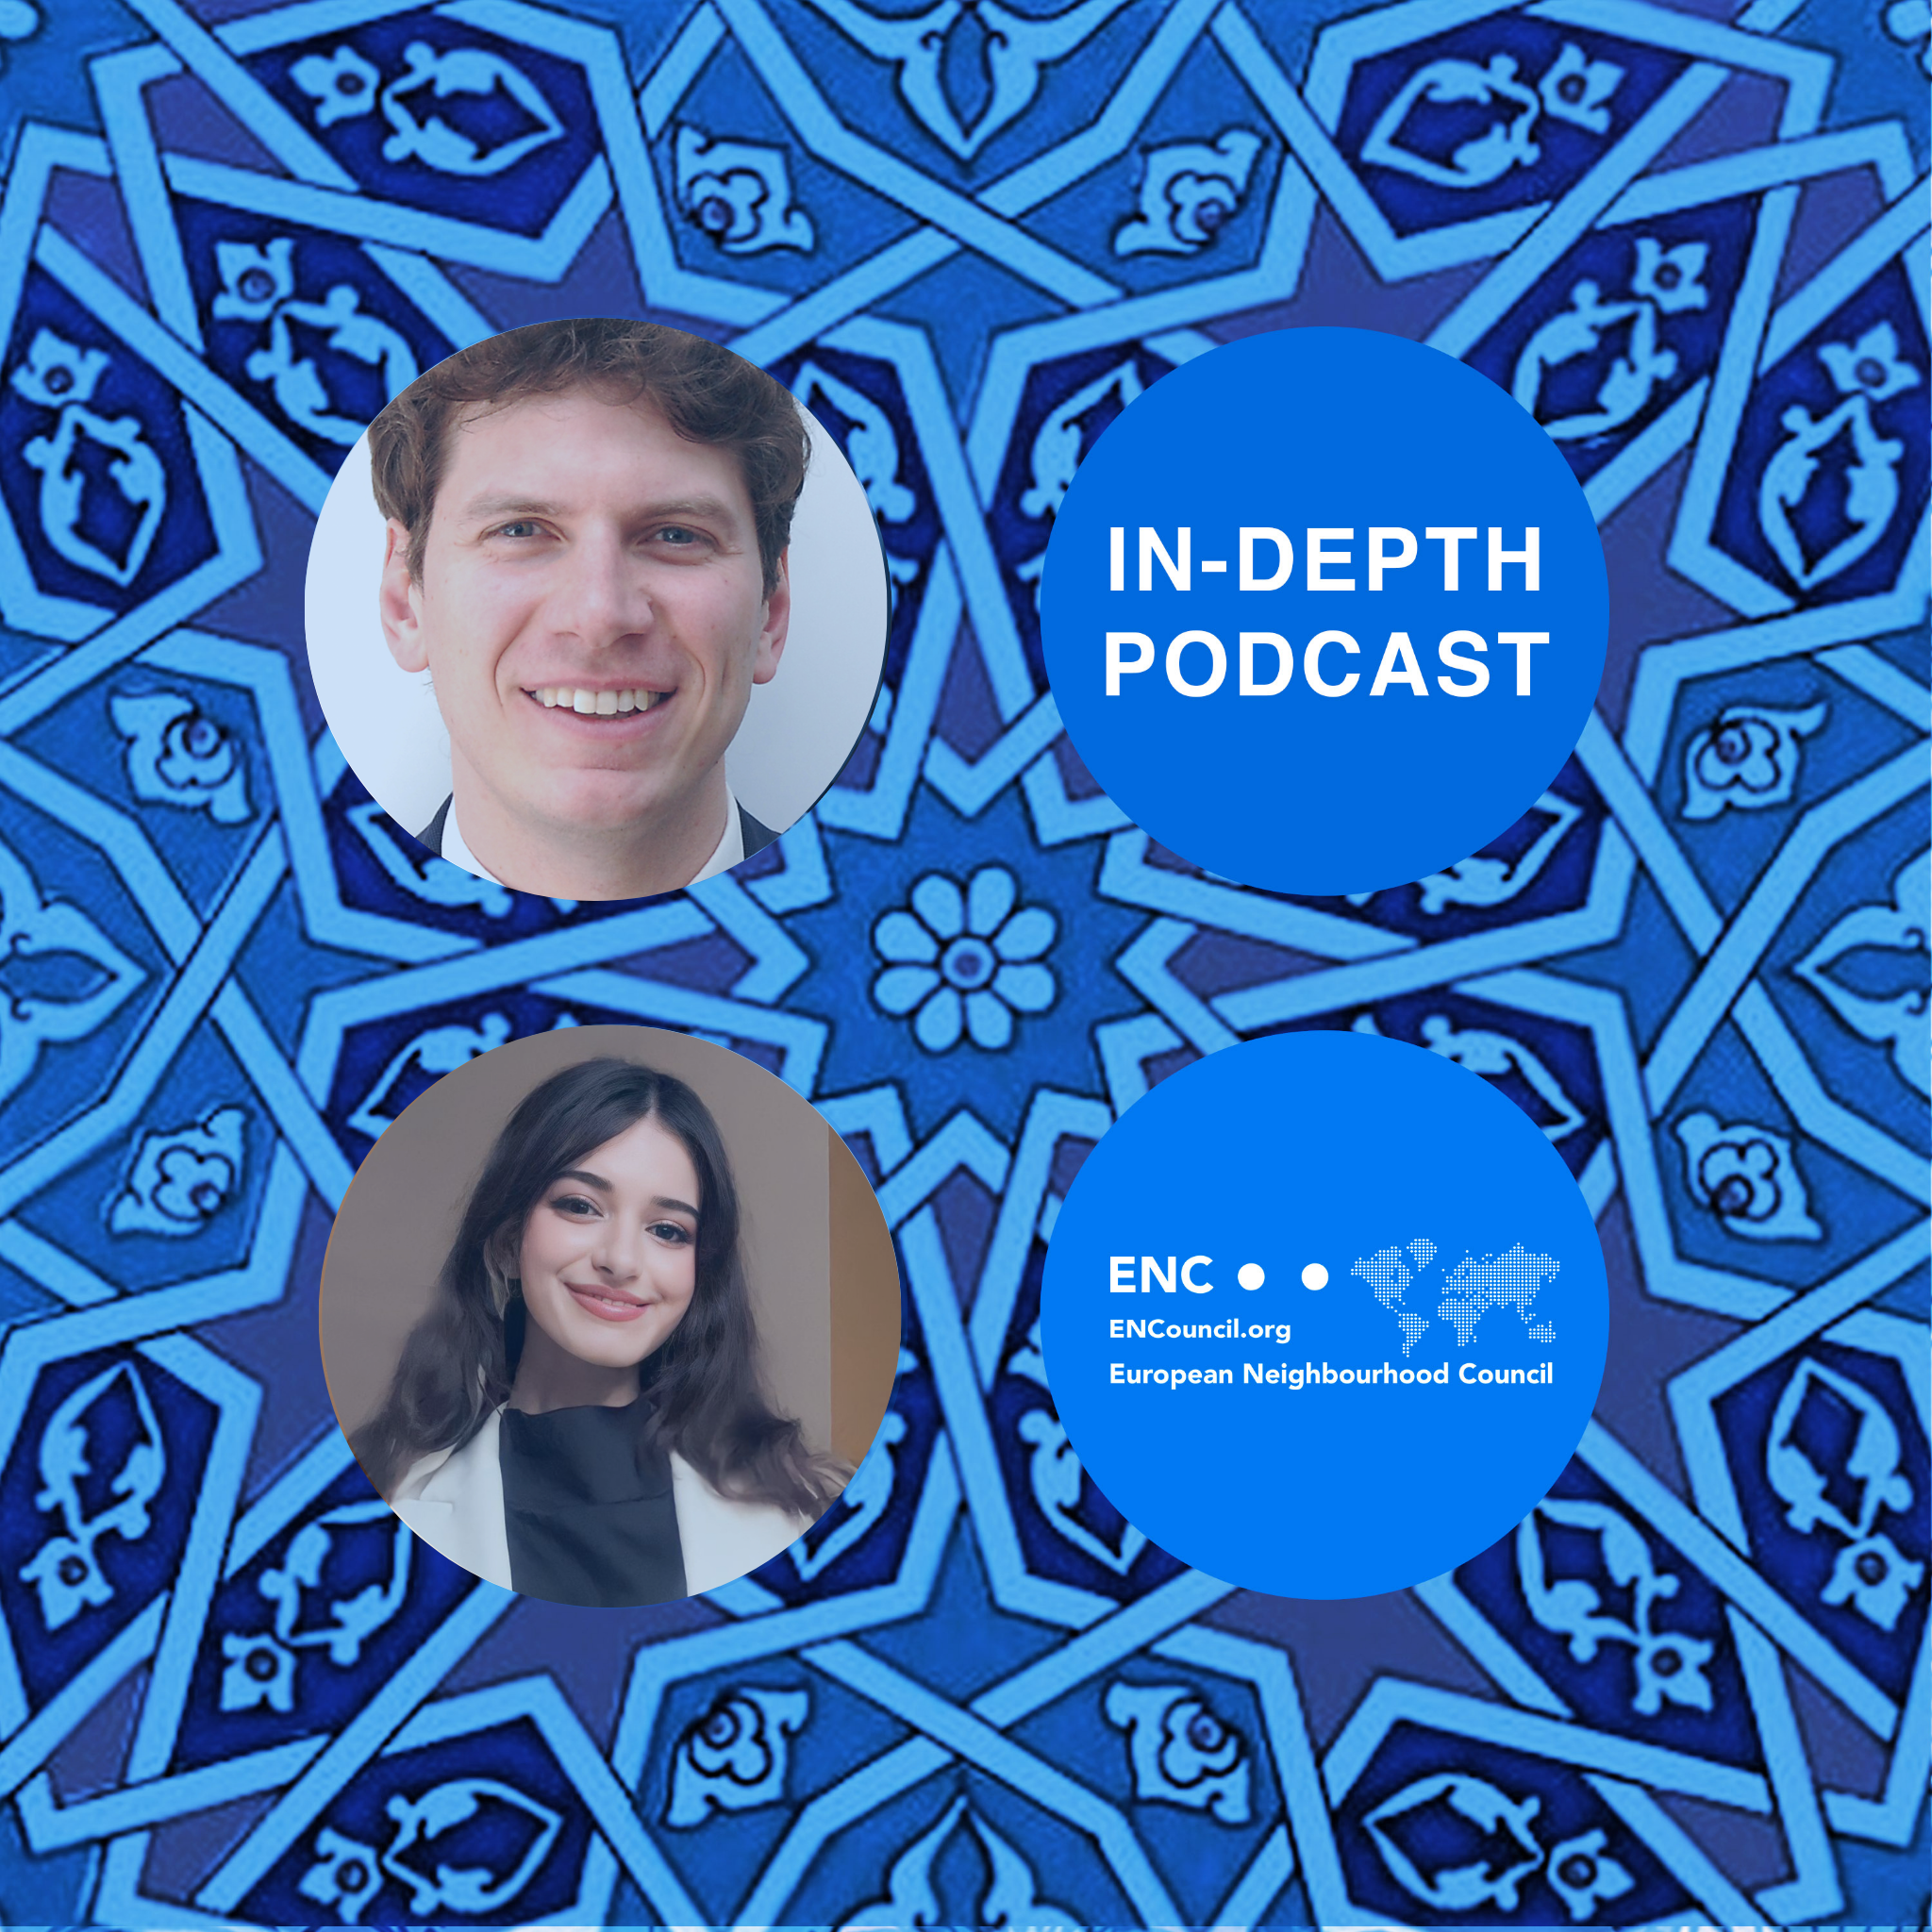 ENC In-Depth Podcast: Promoting Equal Opportunities through the EU-funded “Sanarip Insan” (Digital Citizen) project